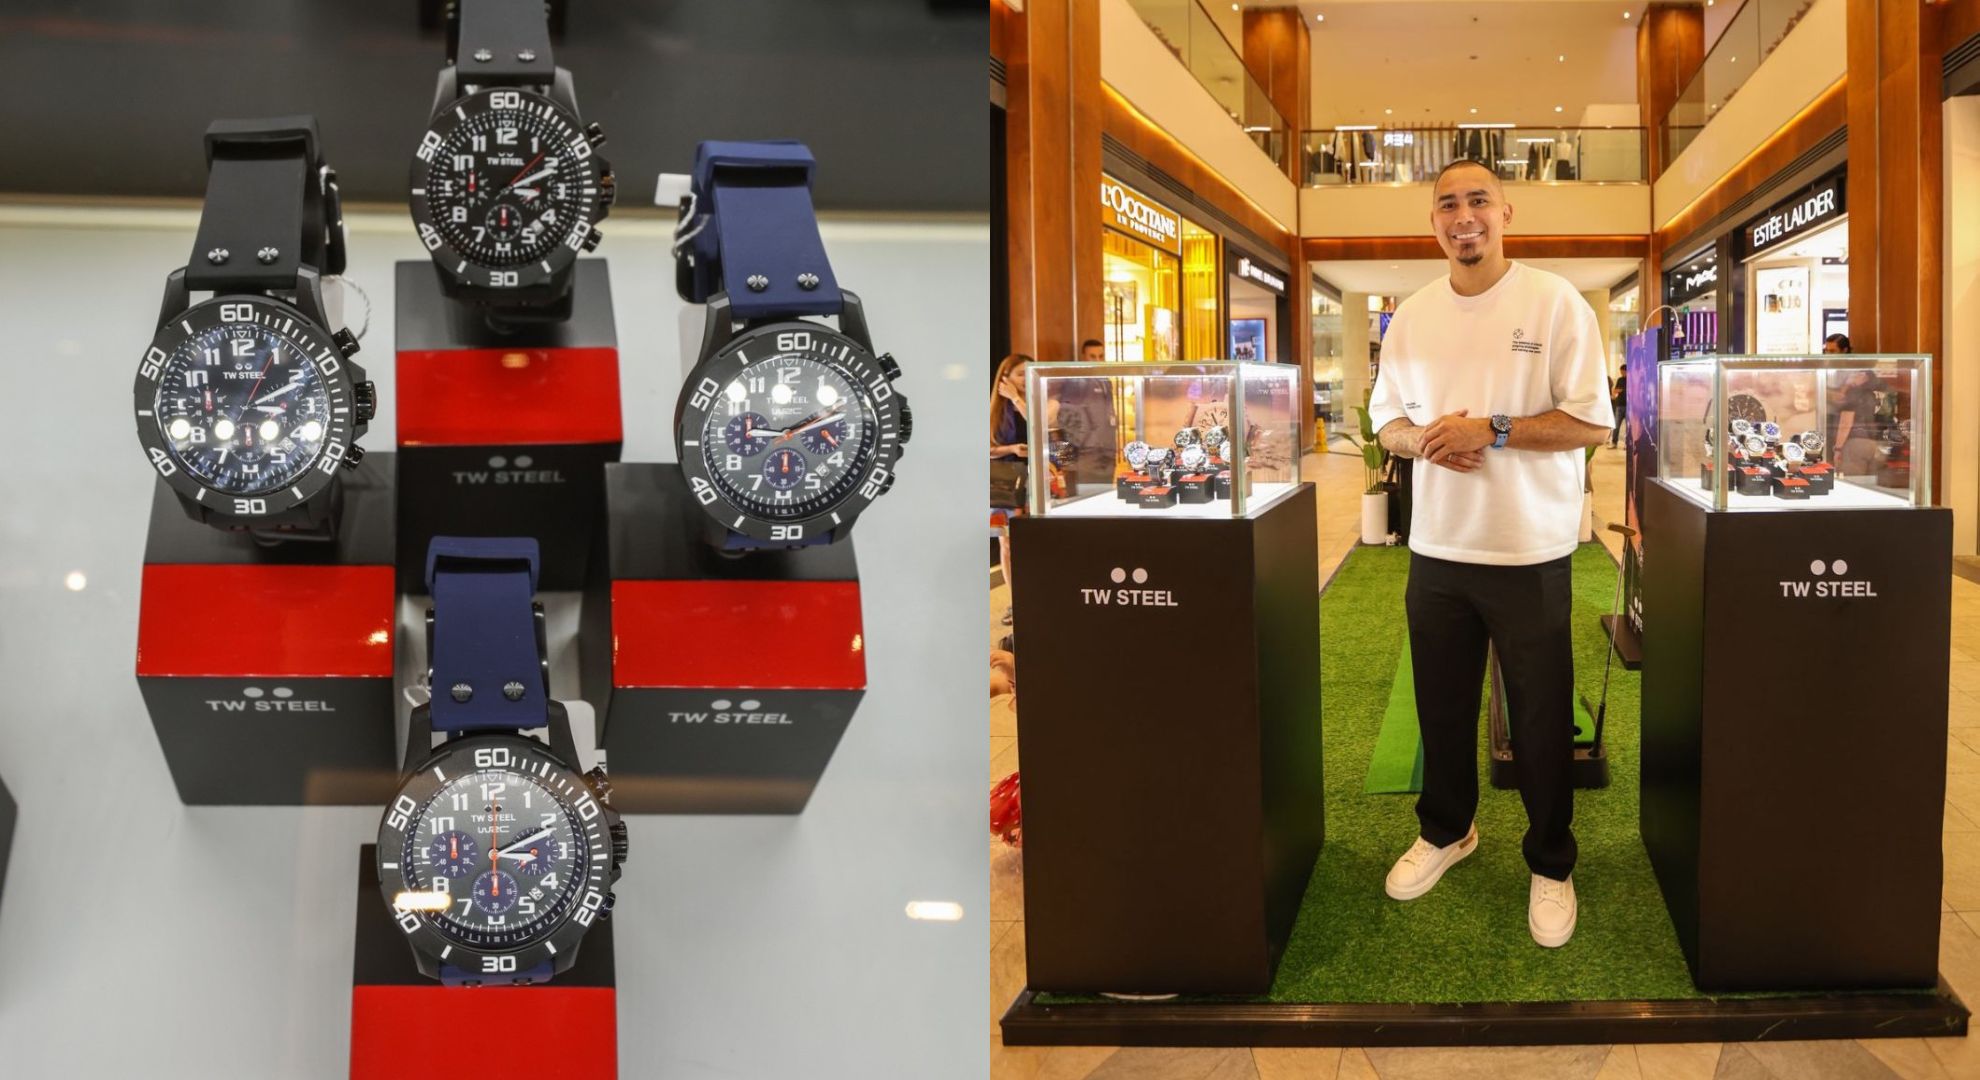 Tee off at TW Steel's exclusive pop-up shop at Rockwell Power Plant Mall